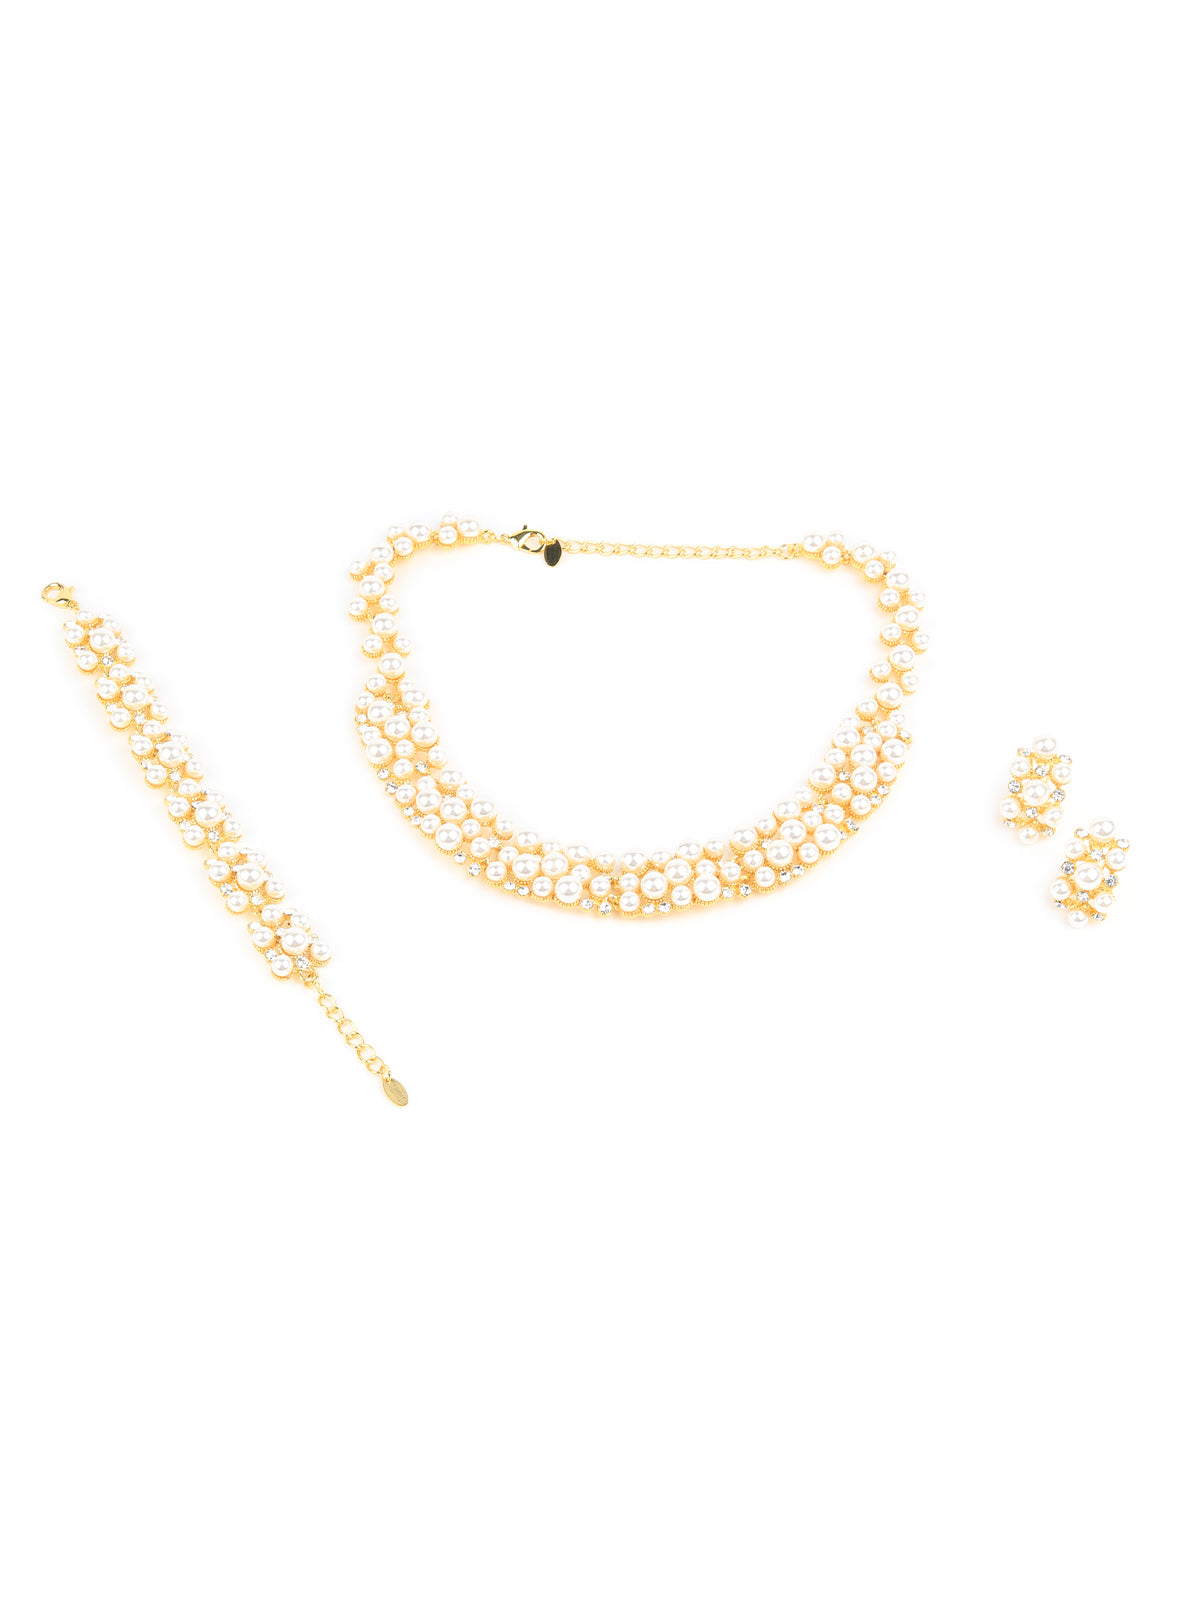 High quality white beaded necklace set